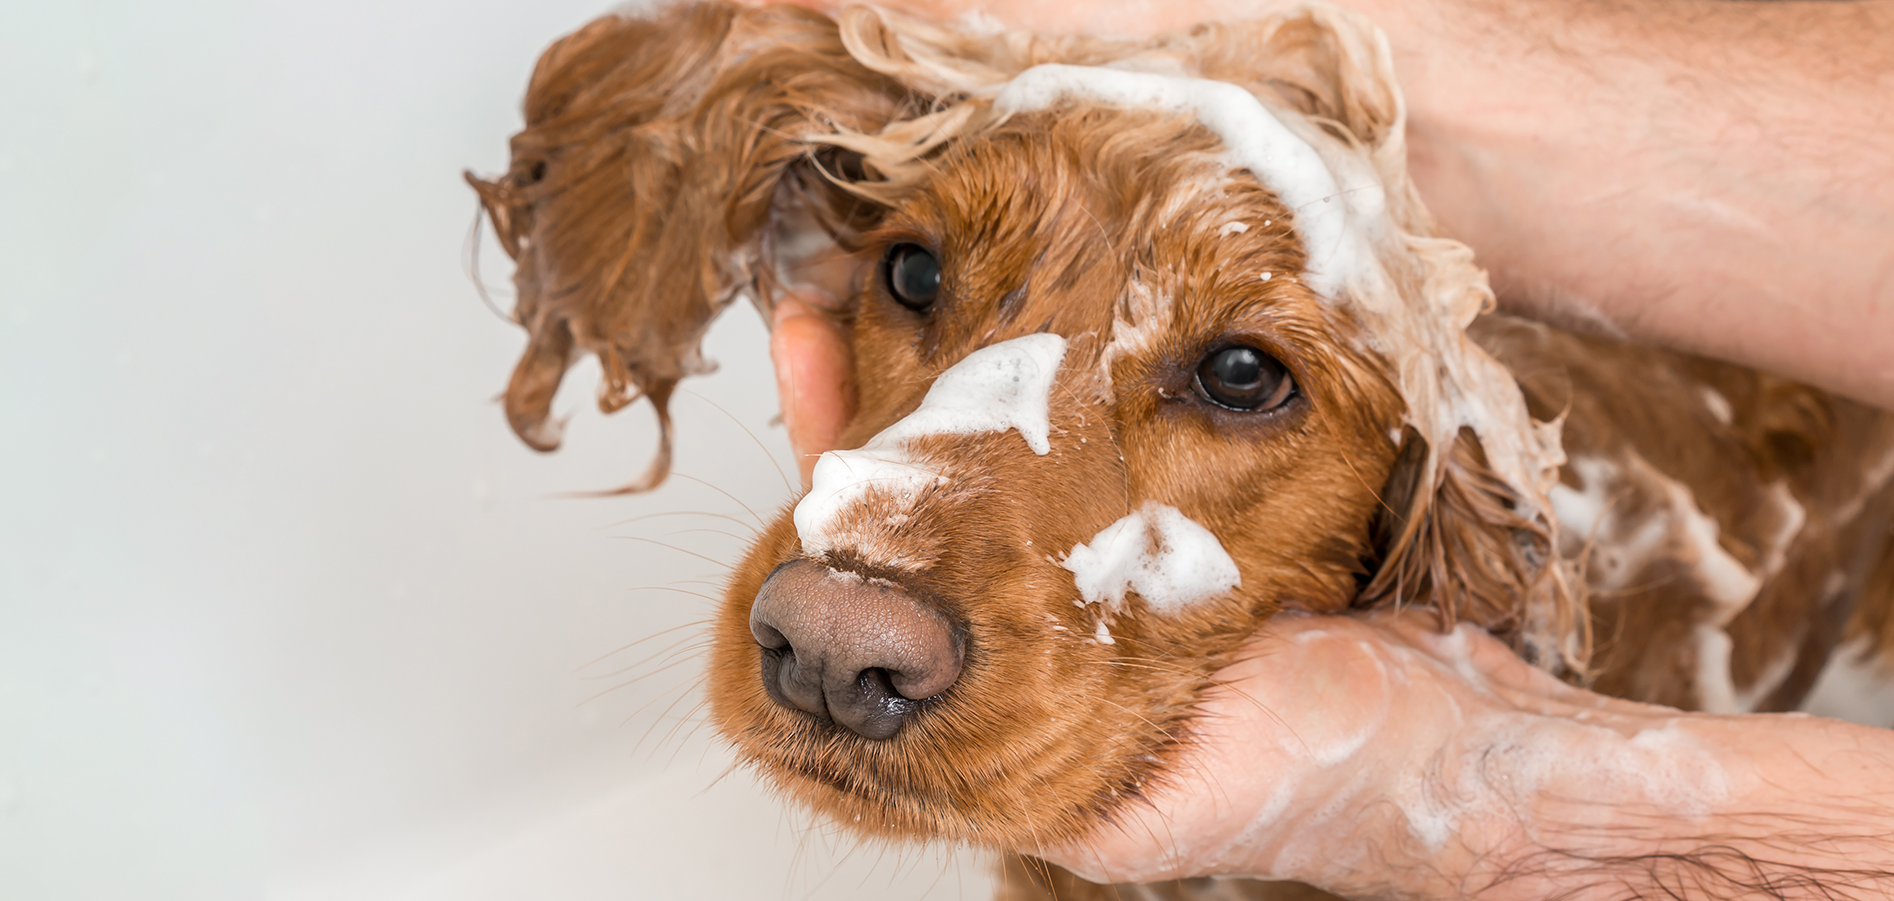 How to make a bath a positive experience for your dog